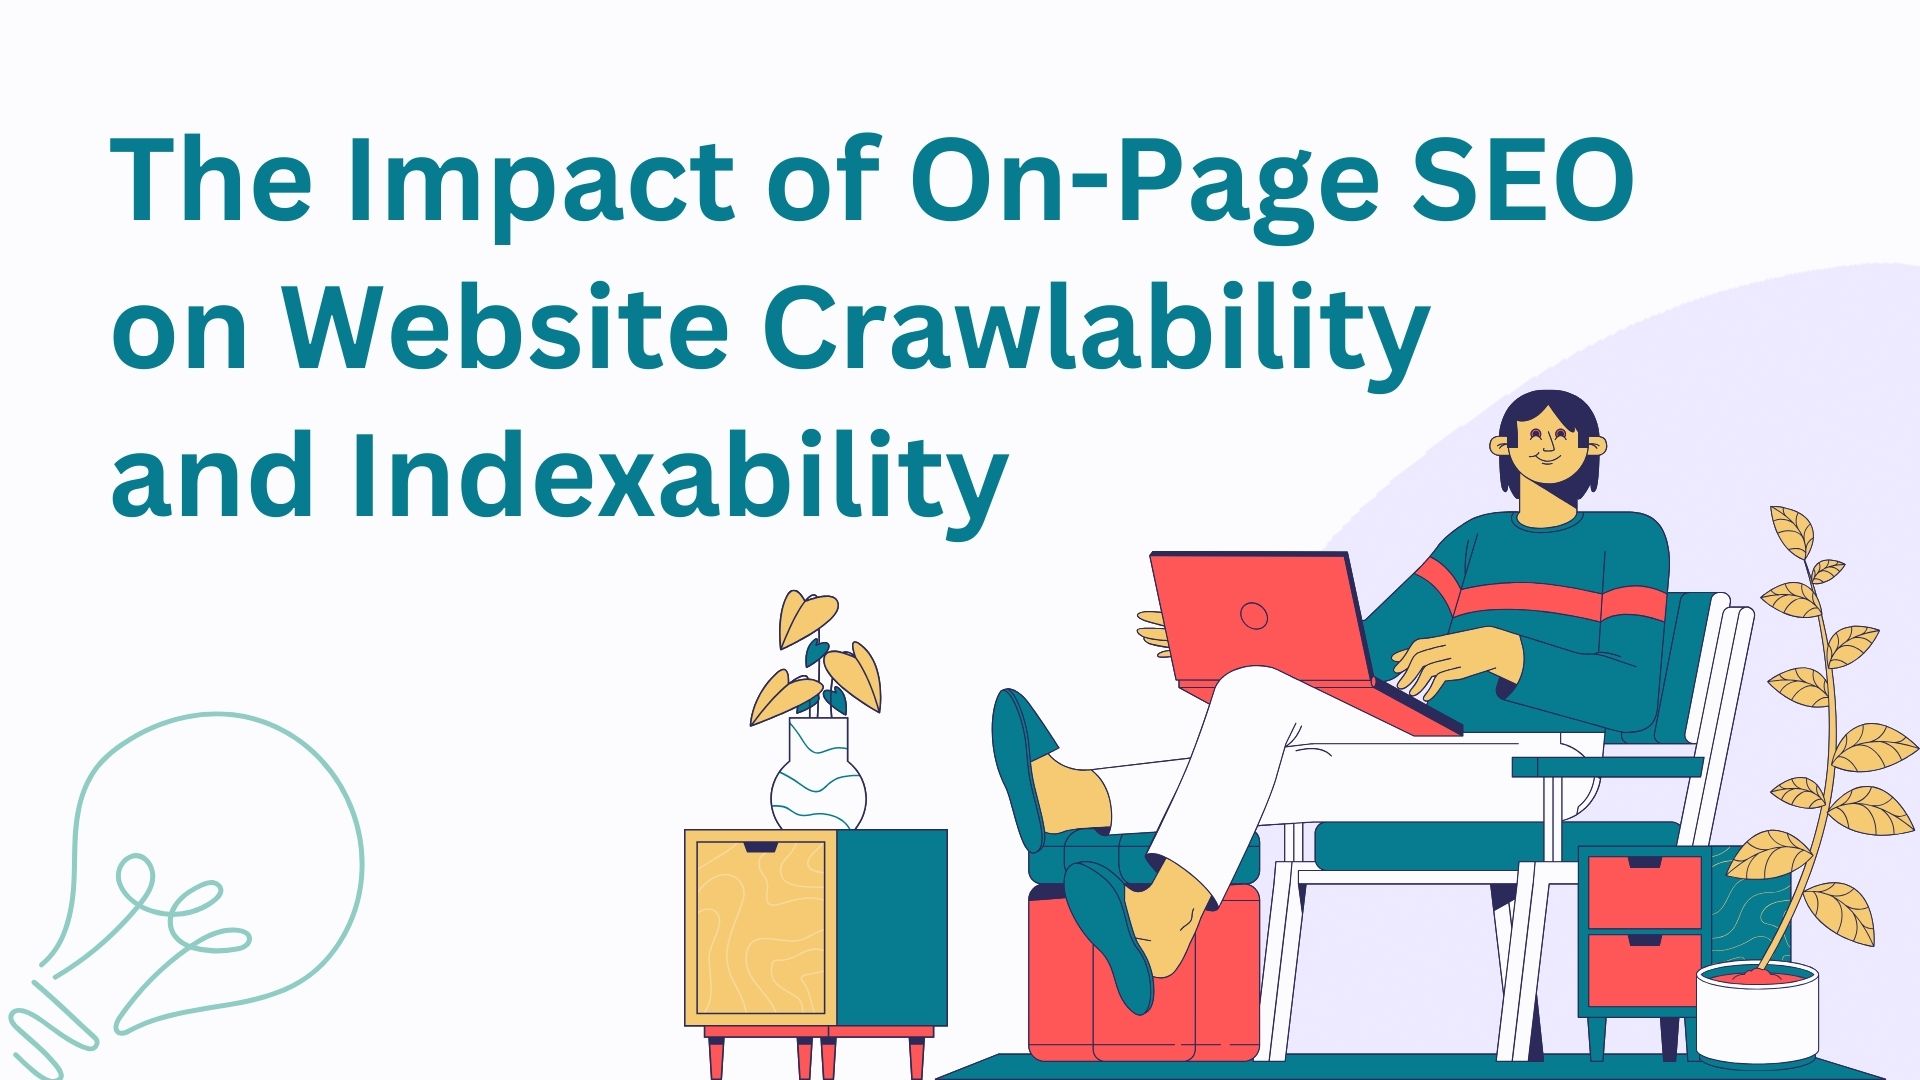 The Impact of On-Page SEO on Website Crawlability and Indexability